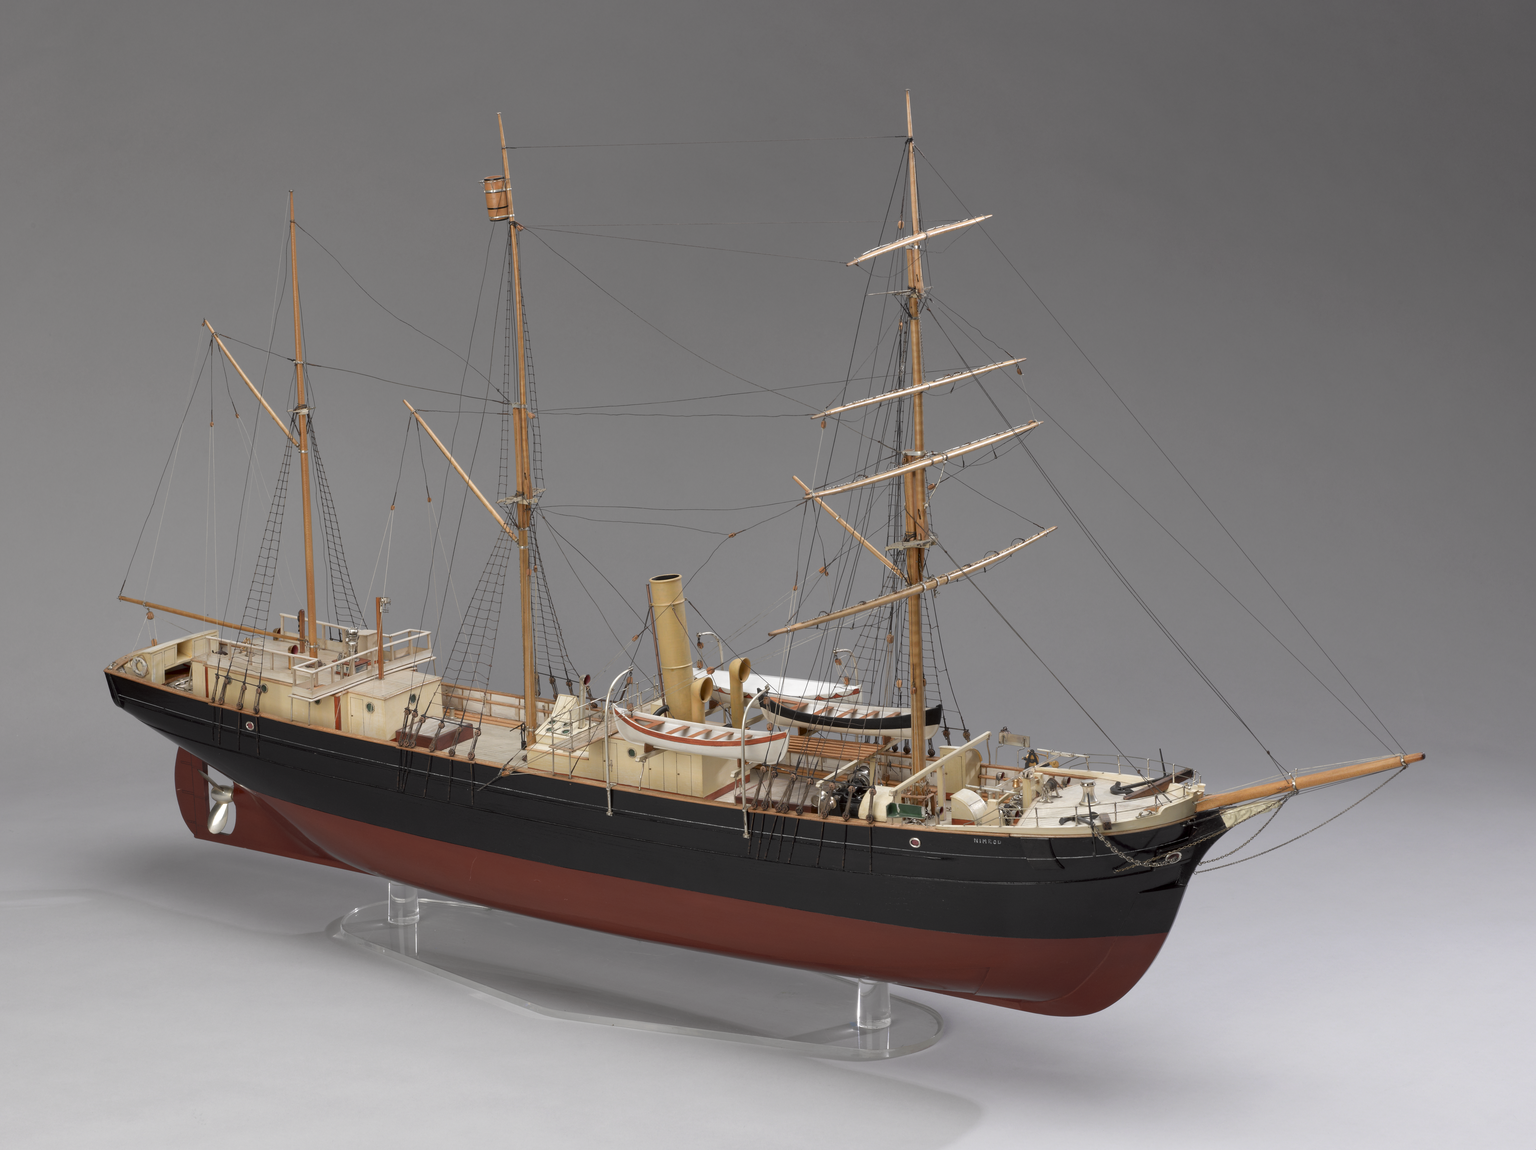 Whole barquentine rigged model of the single-screw converted whaler the 'Nimrod' used by Ernest Shackleton during the British Antarctic Expedition 1907-1909